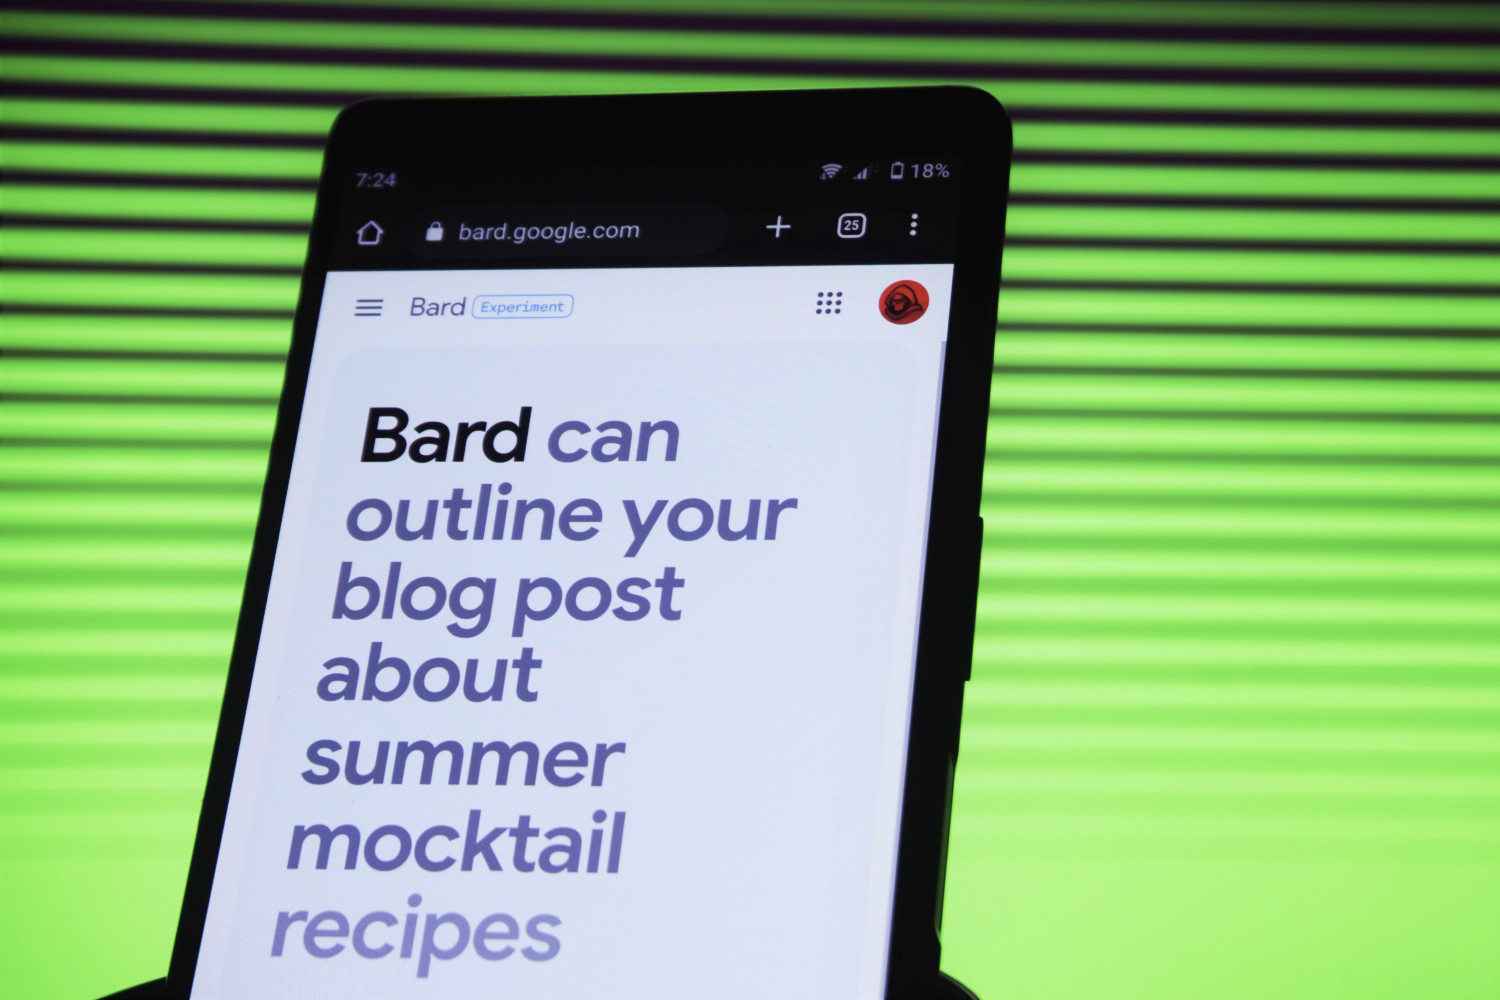 The Google Bard AI chatbot in a web browser shown on the screen of an Android smartphone.